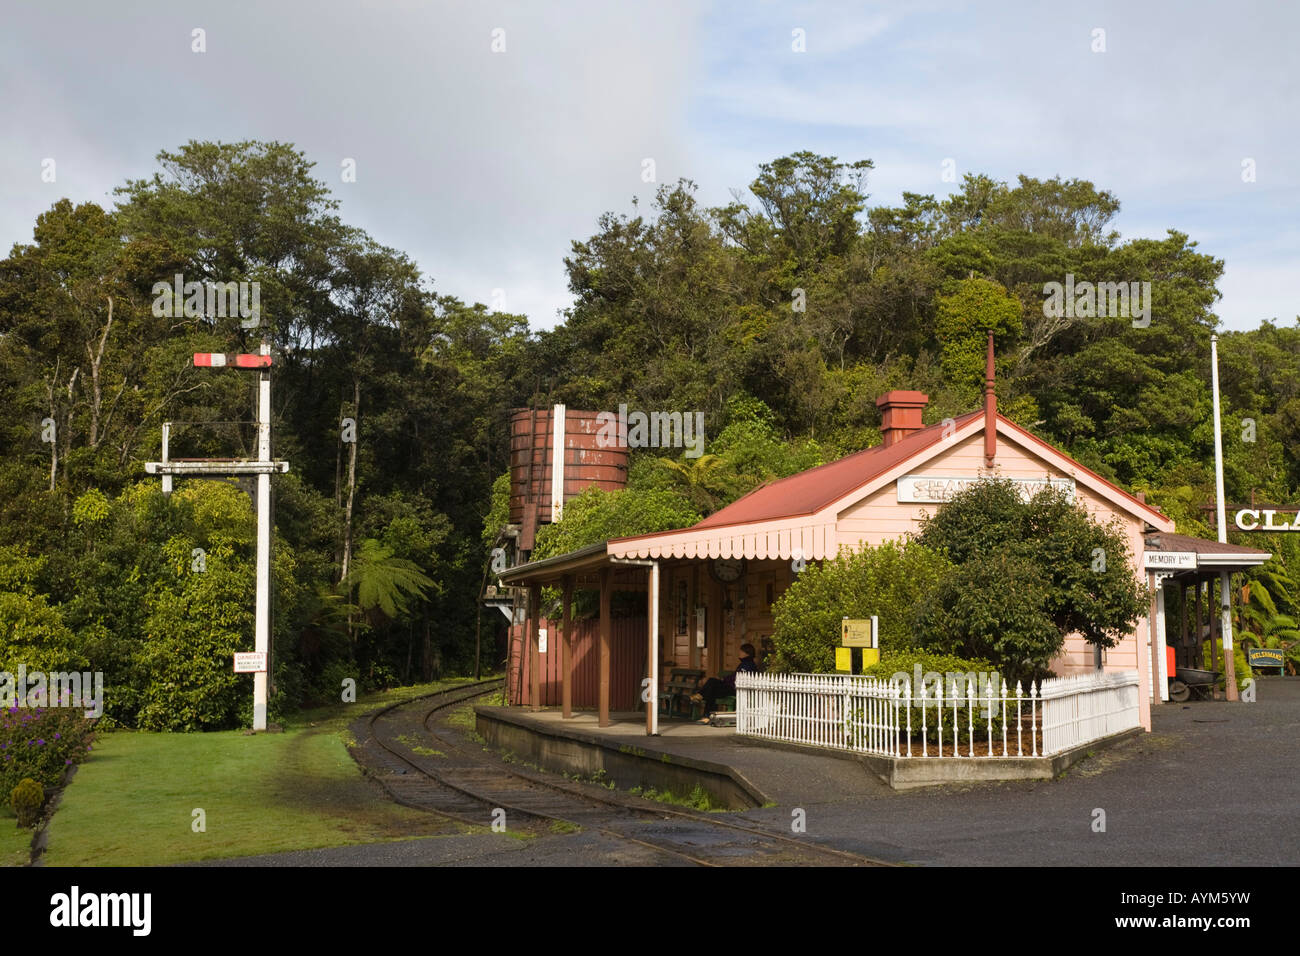 Old railway station building in Shantytown replica 19th century town tourist attraction Greymouth South Island New Zealand Stock Photo